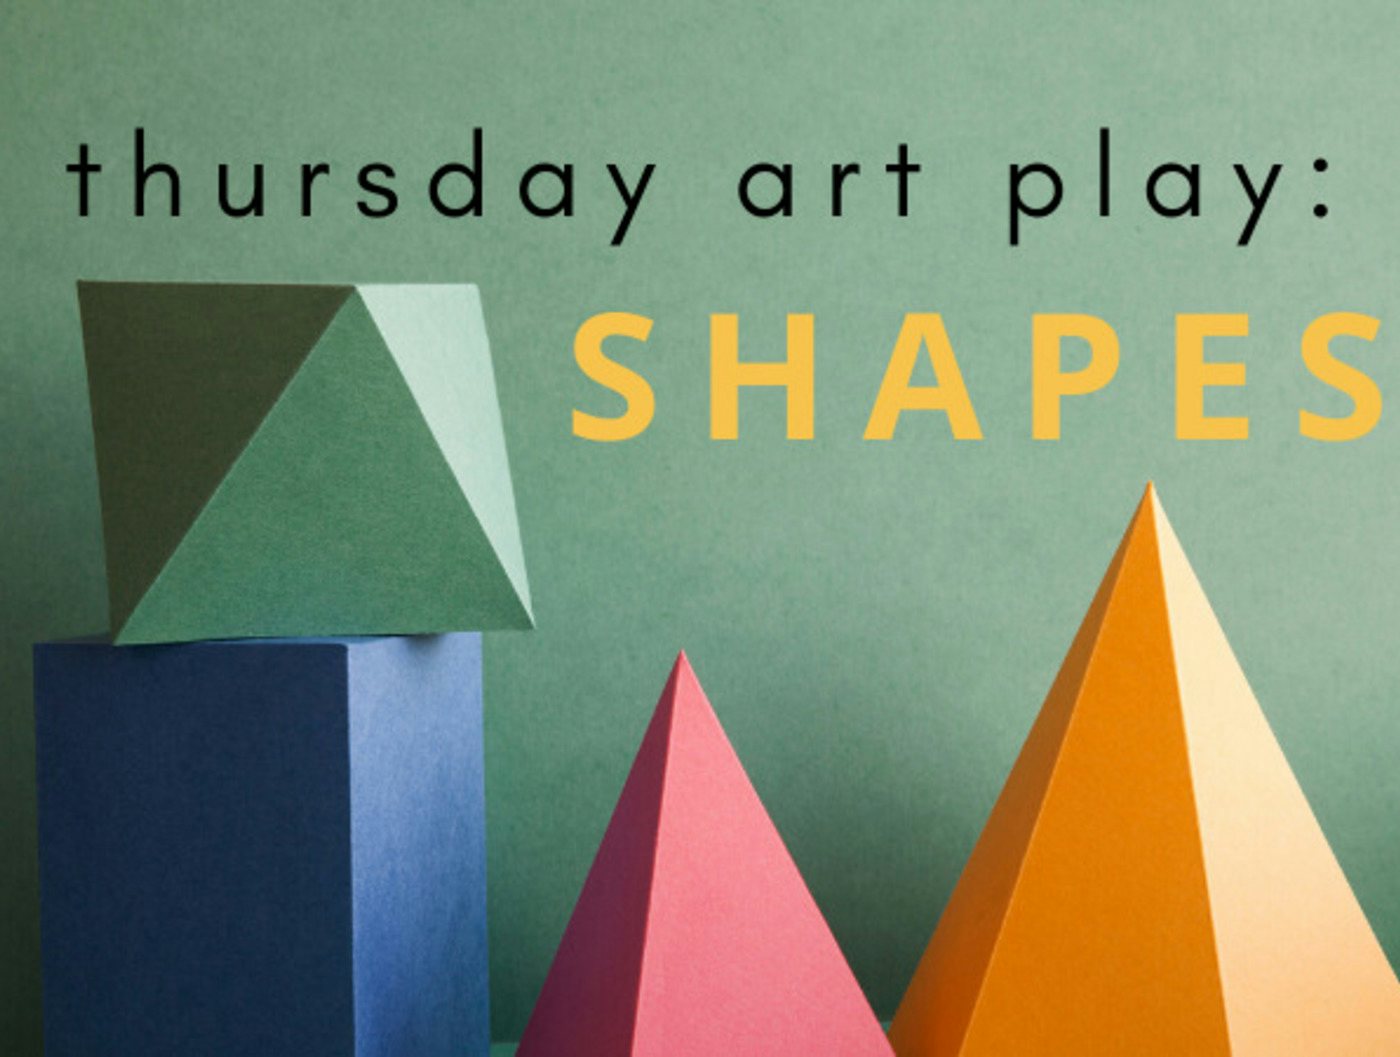 Thursday Art Play: The Shape of Things